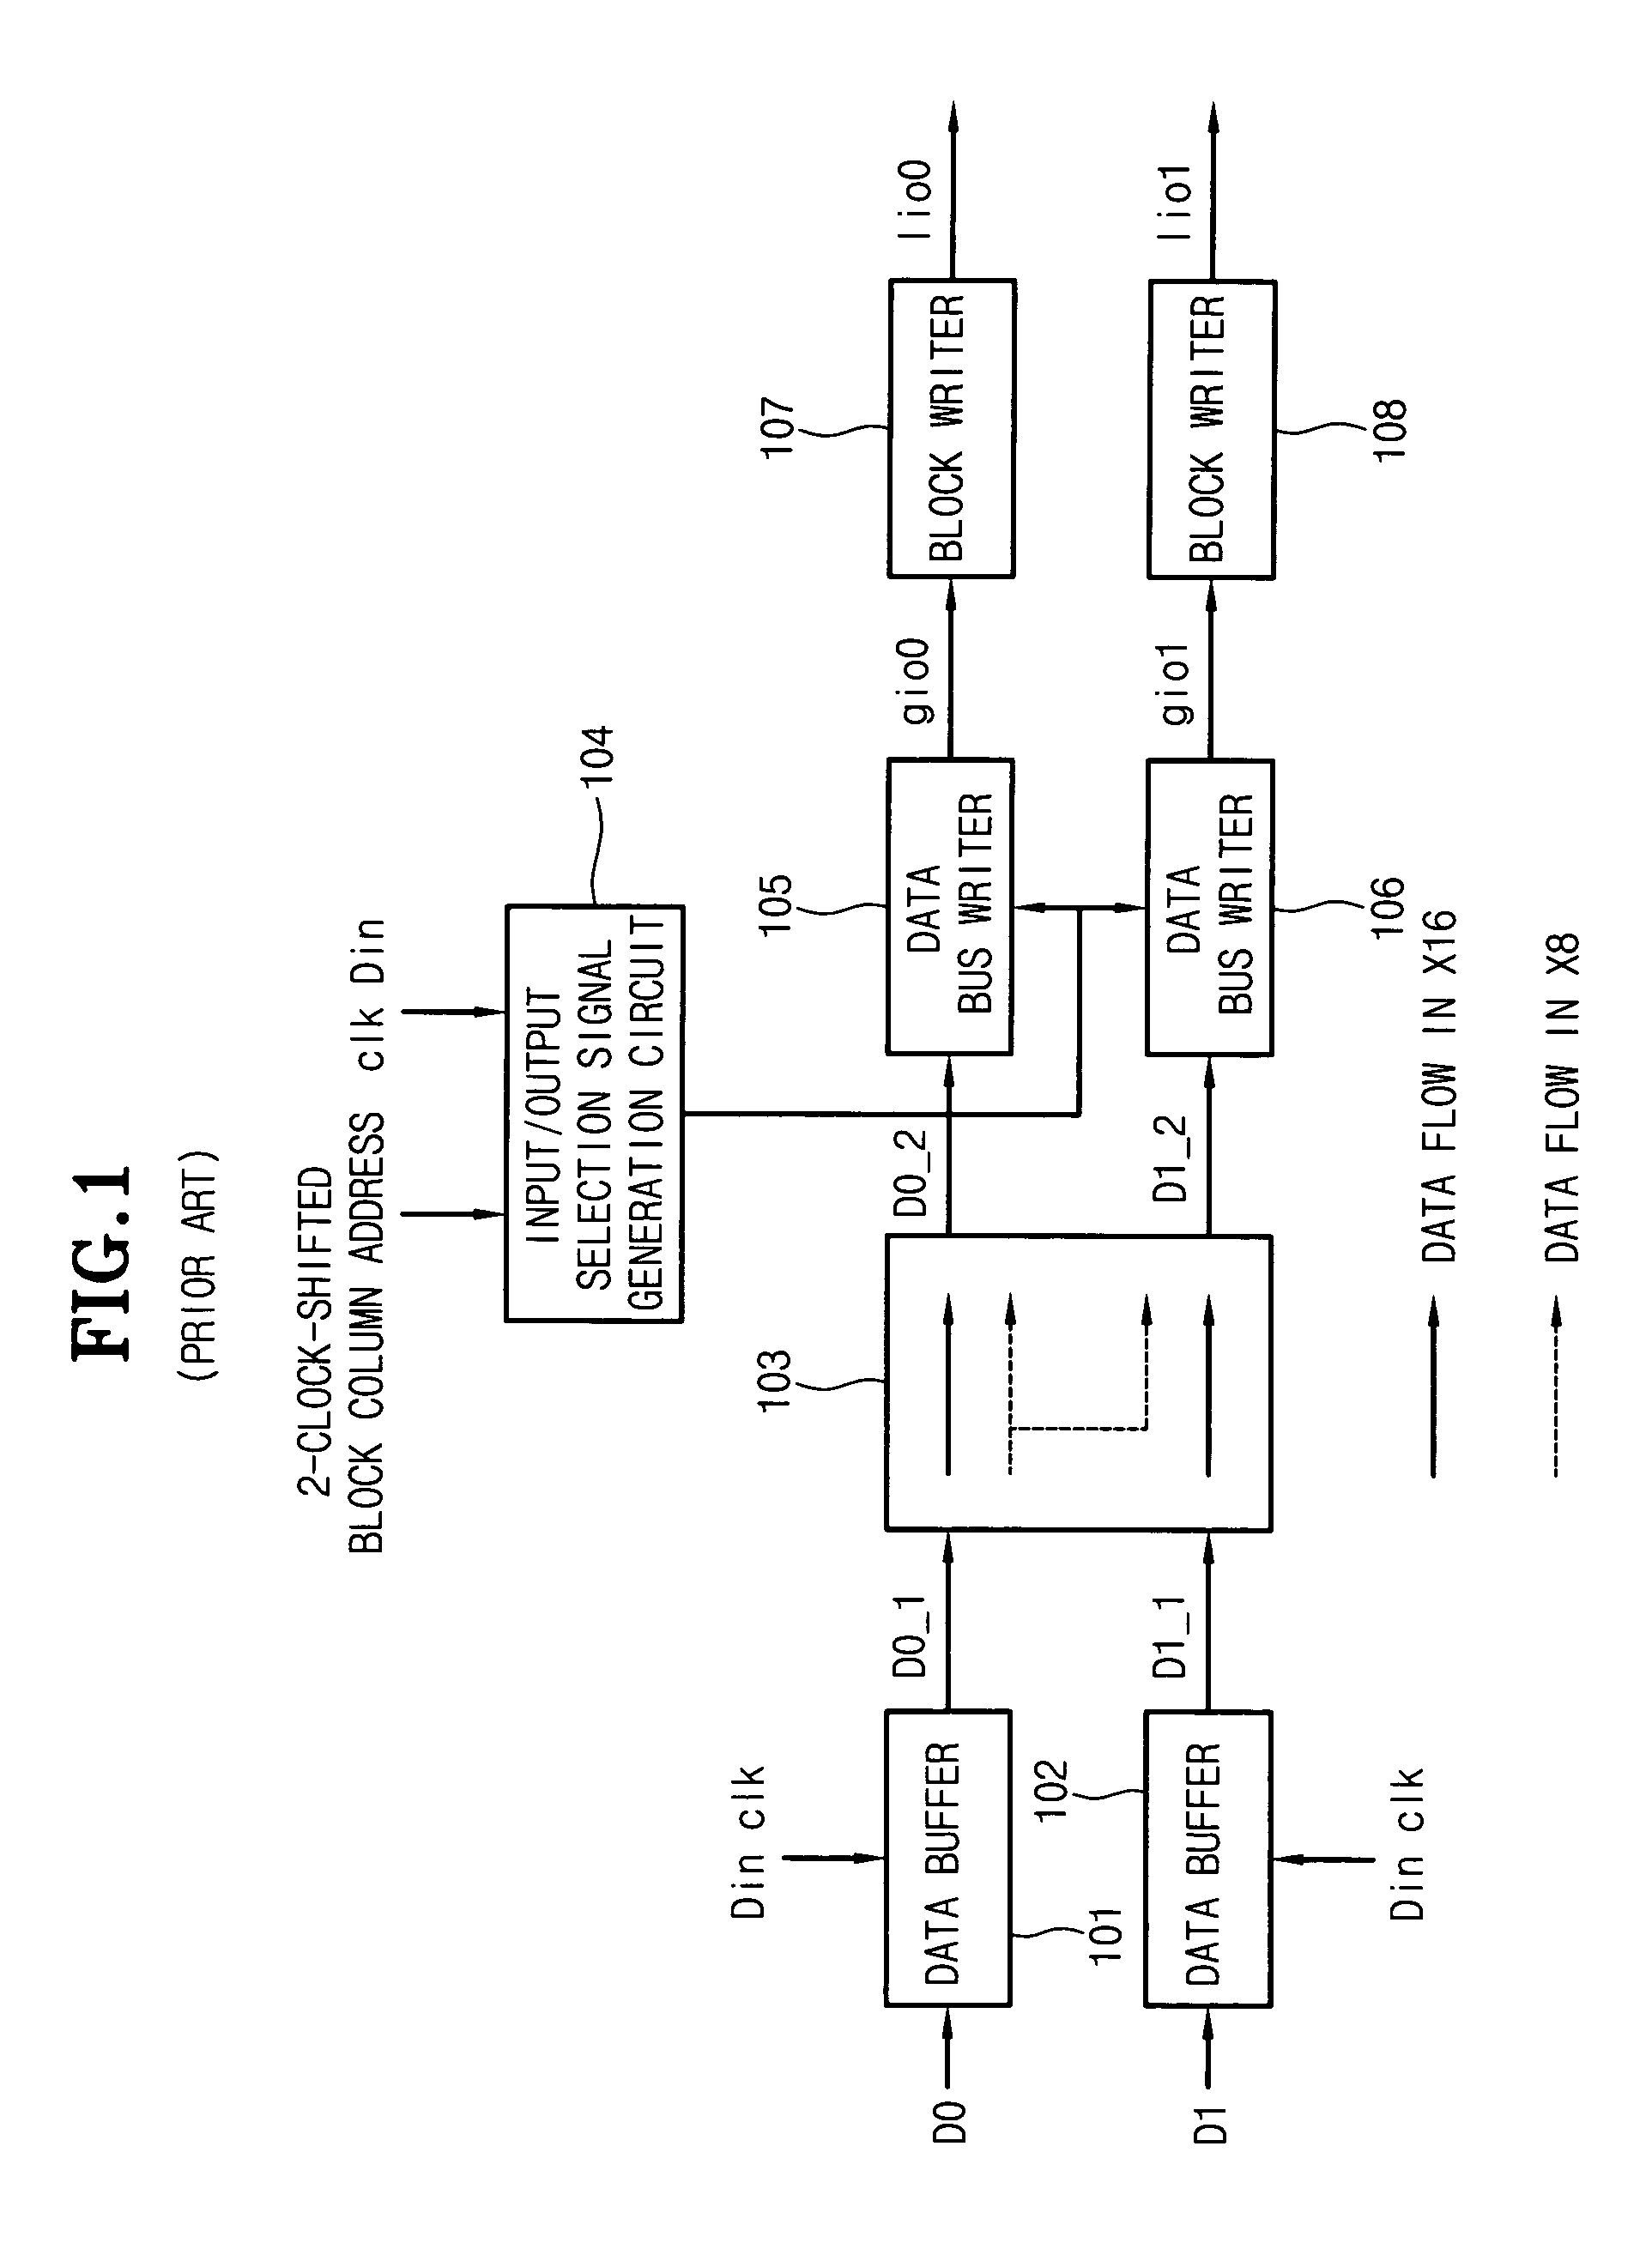 Input circuit for memory device